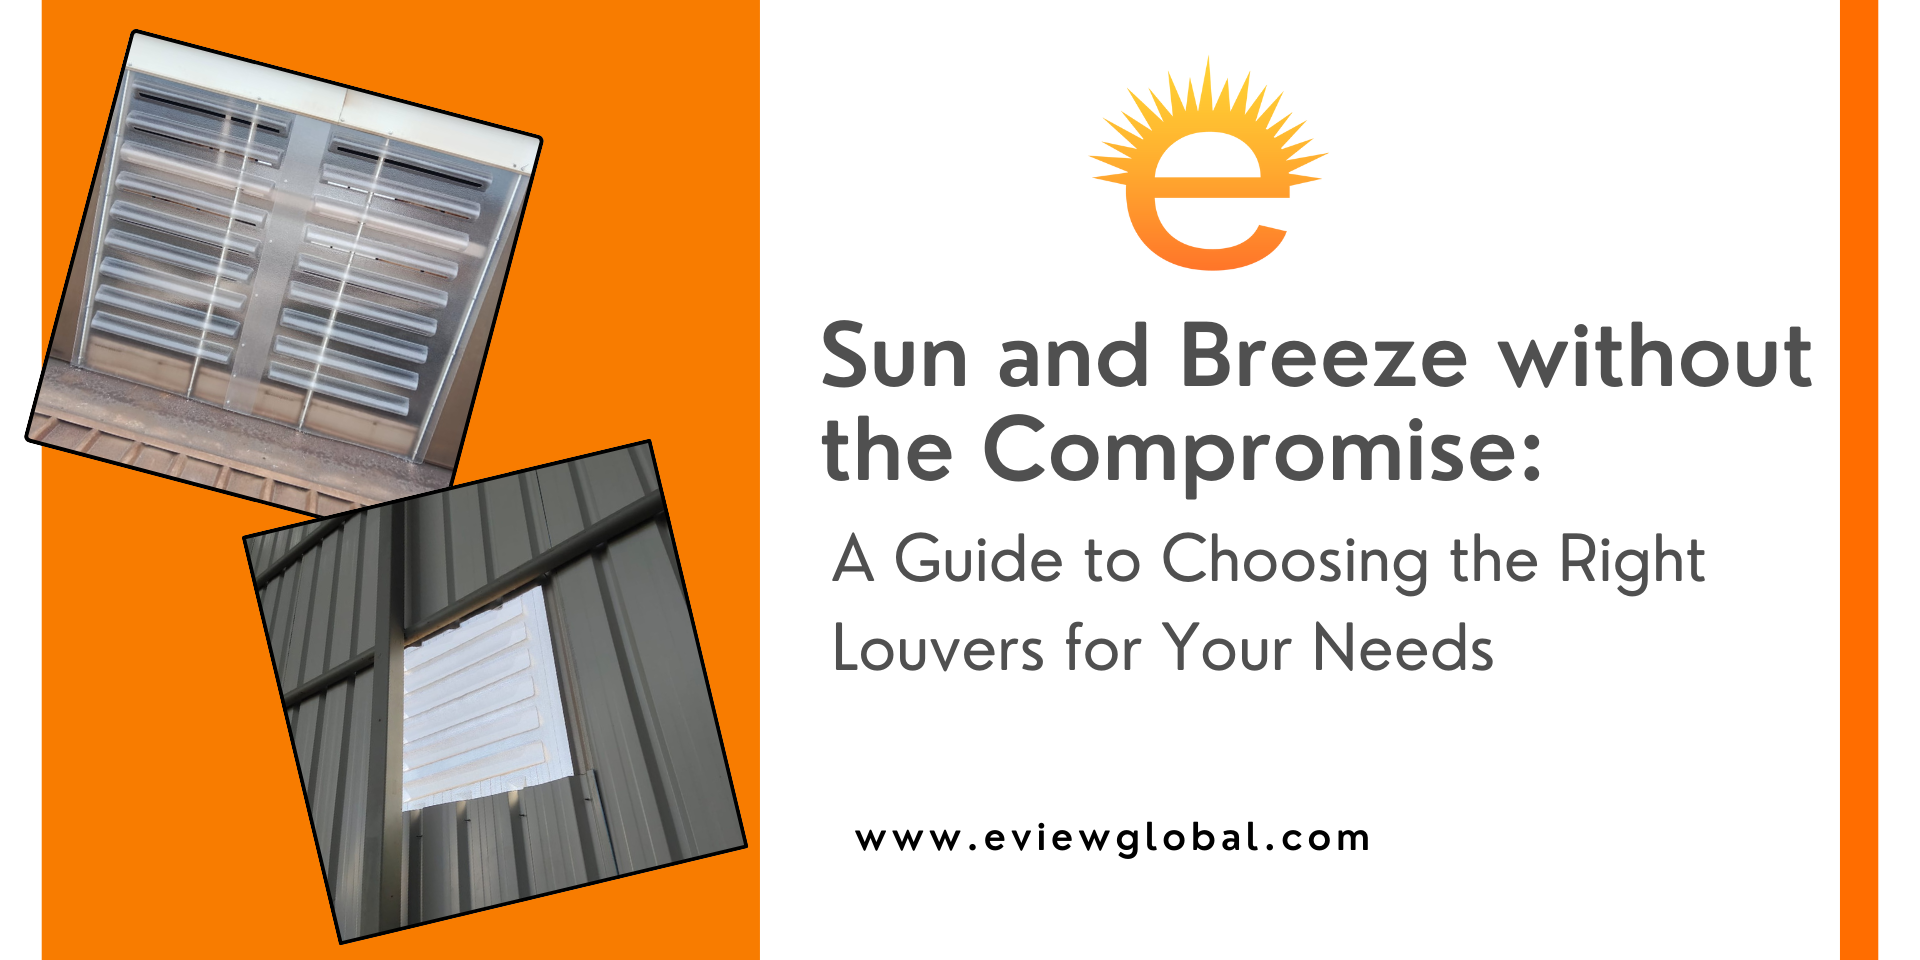 Sun and Breeze without the Compromise: A Guide to Choosing the Right Louvers for Your Needs